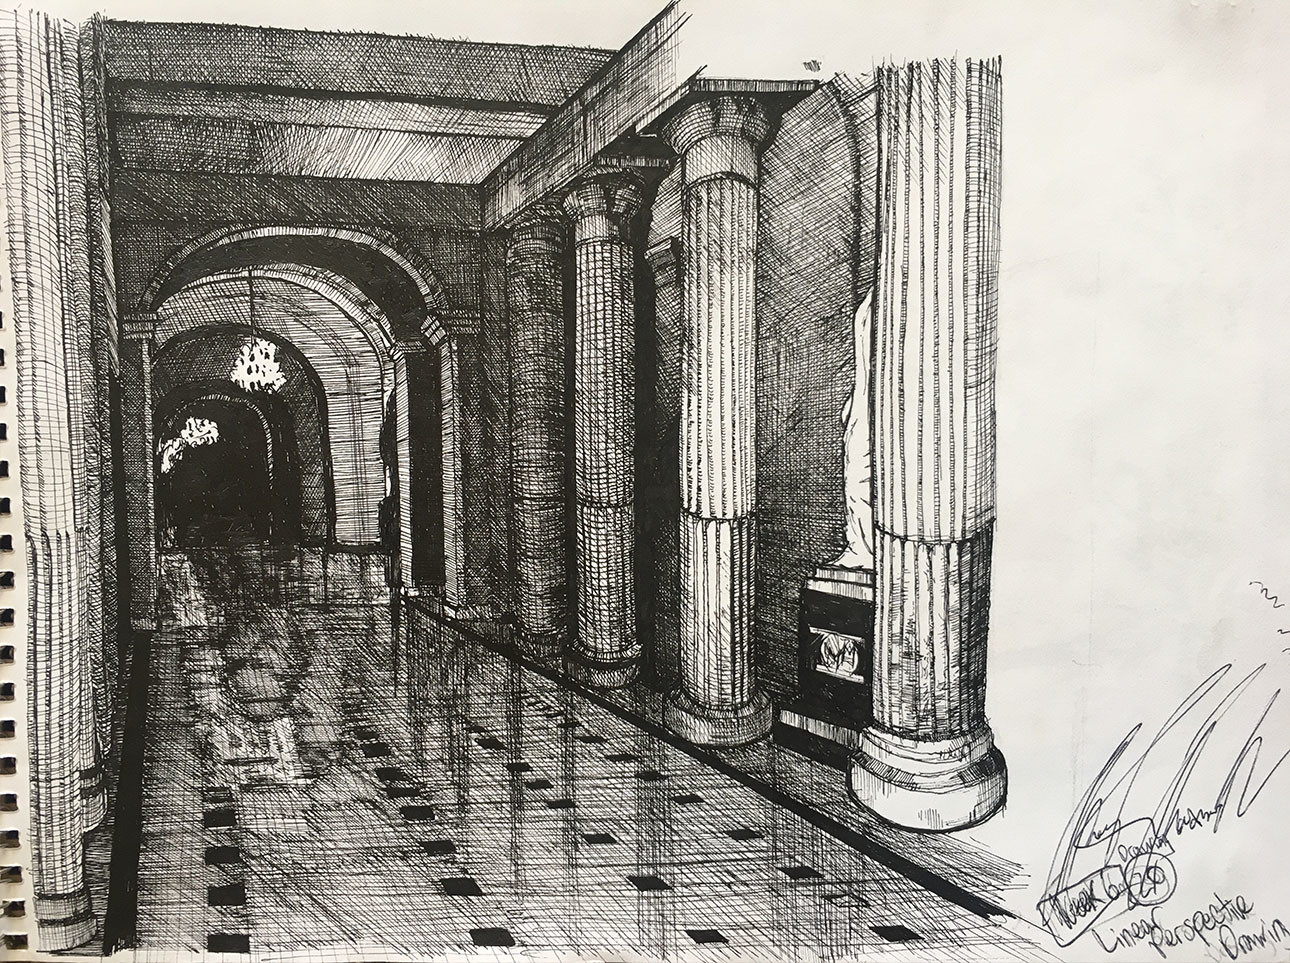 8" x 10" sketchbook drawing done from a photo I took inside the D.C. Capitol Building.  The perspective is off on the columns but I was rushing to get it done for a class. 